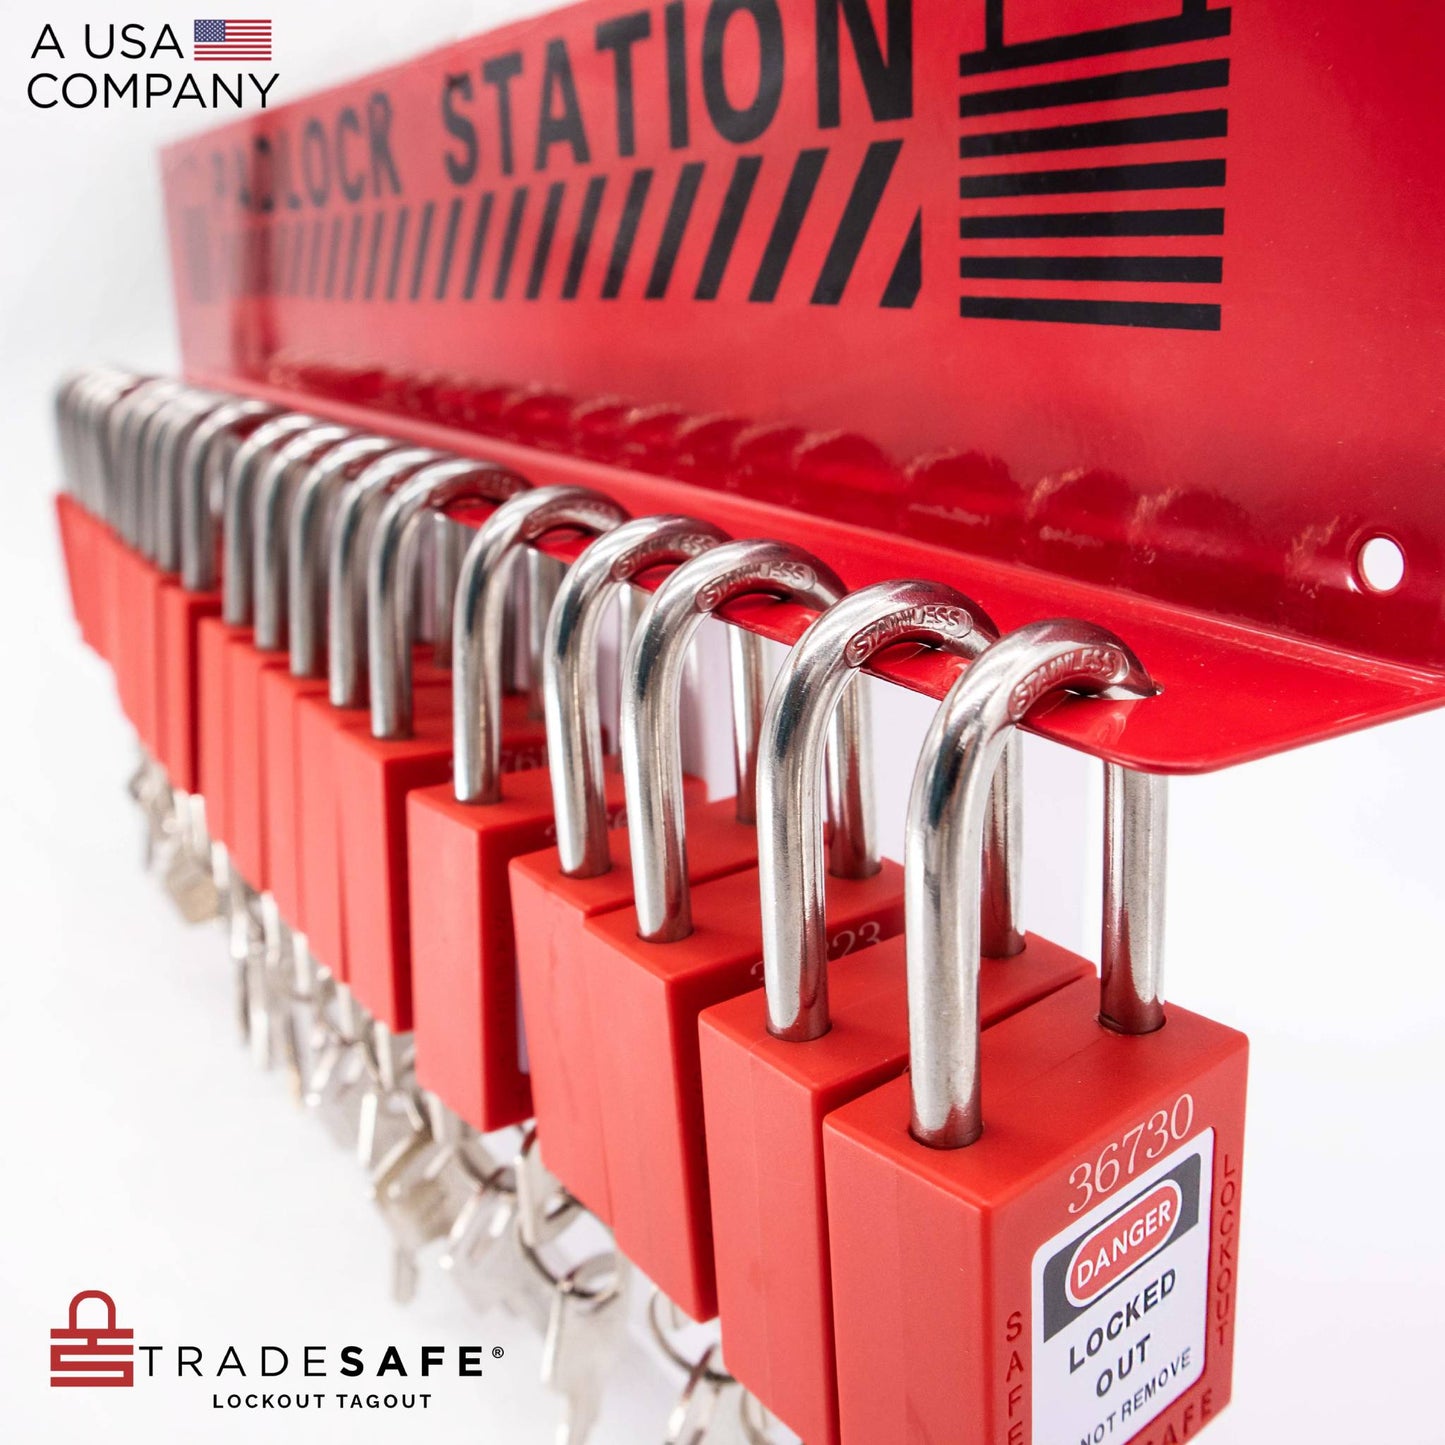 close-up view of a red padlock station stocked with 20 padlocks with 2 keys each